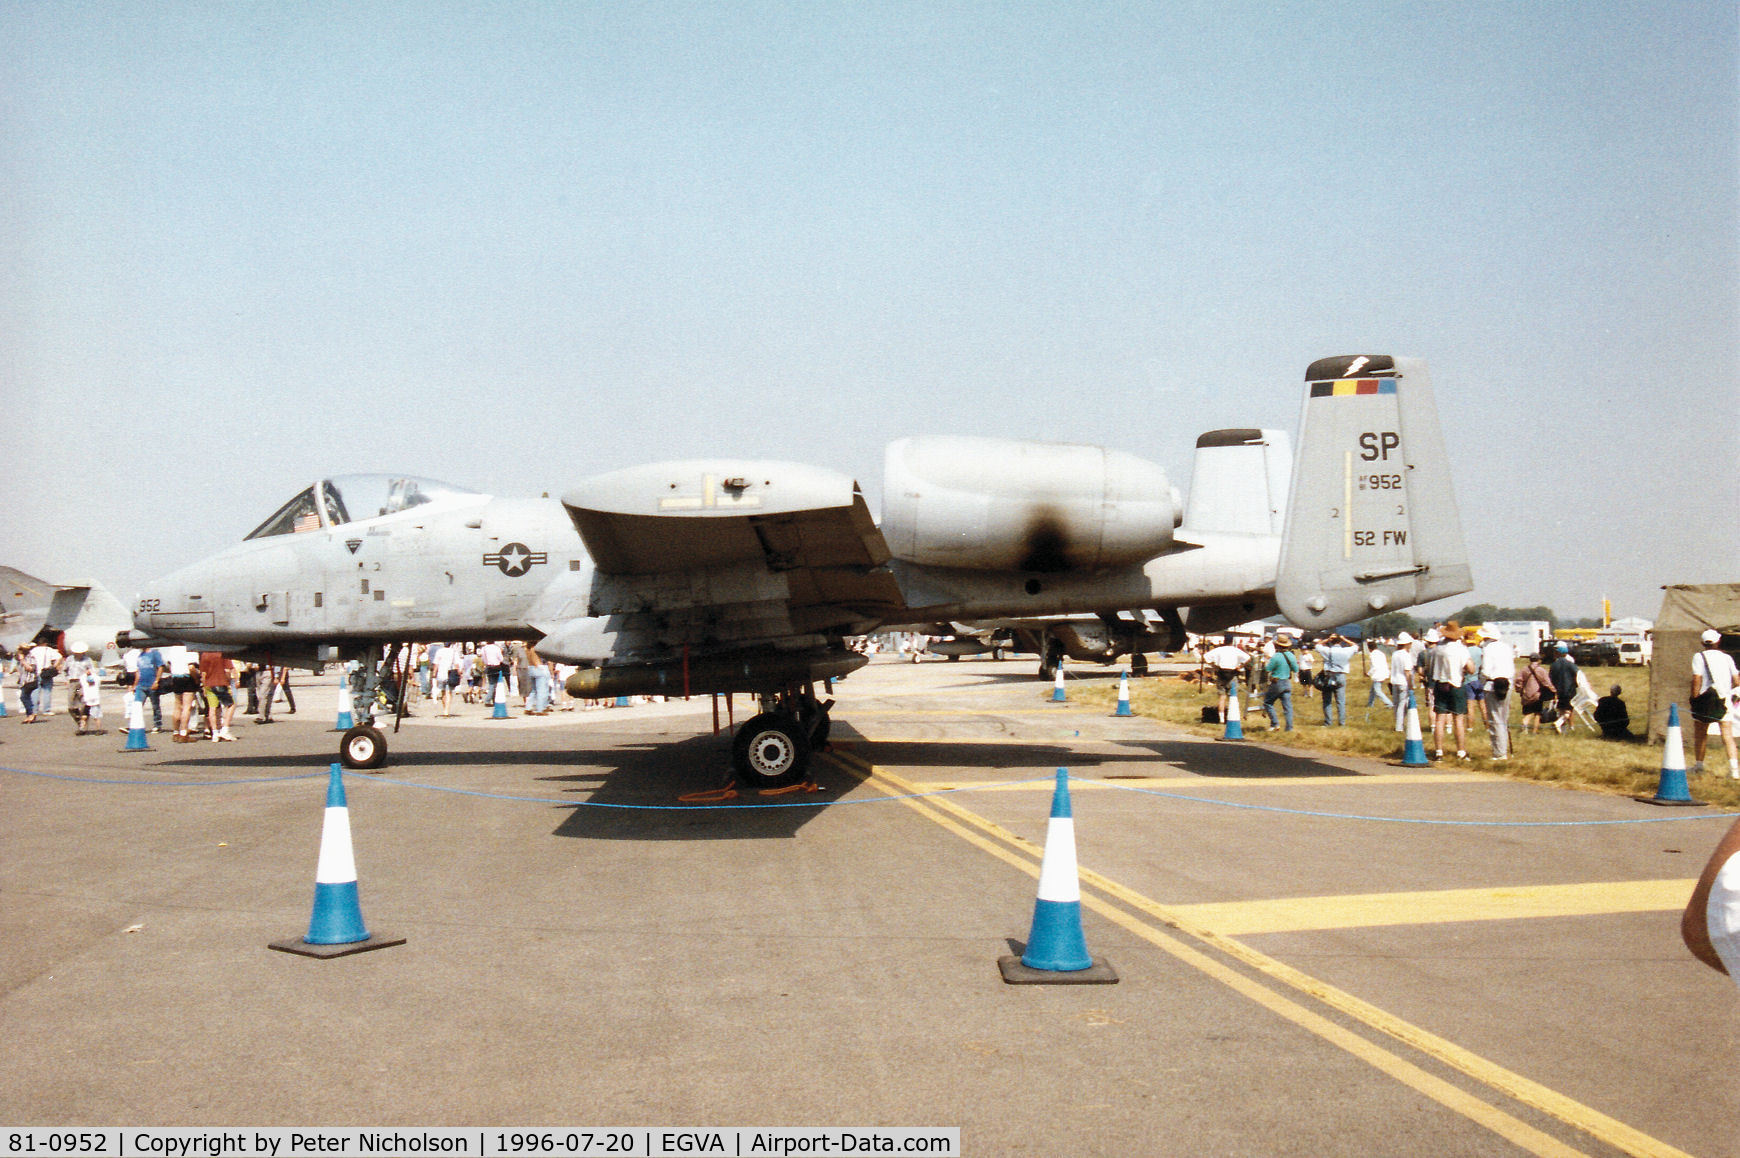 81-0952, 1981 Fairchild Republic A-10A Thunderbolt II C/N A10-0647, A-10A Thunderbolt of the 81st Fighter Squadron/52nd Fighter Wing based at Spangdahlem on display at the 1996 Royal Intnl Air Tattoo at RAF Fairford.